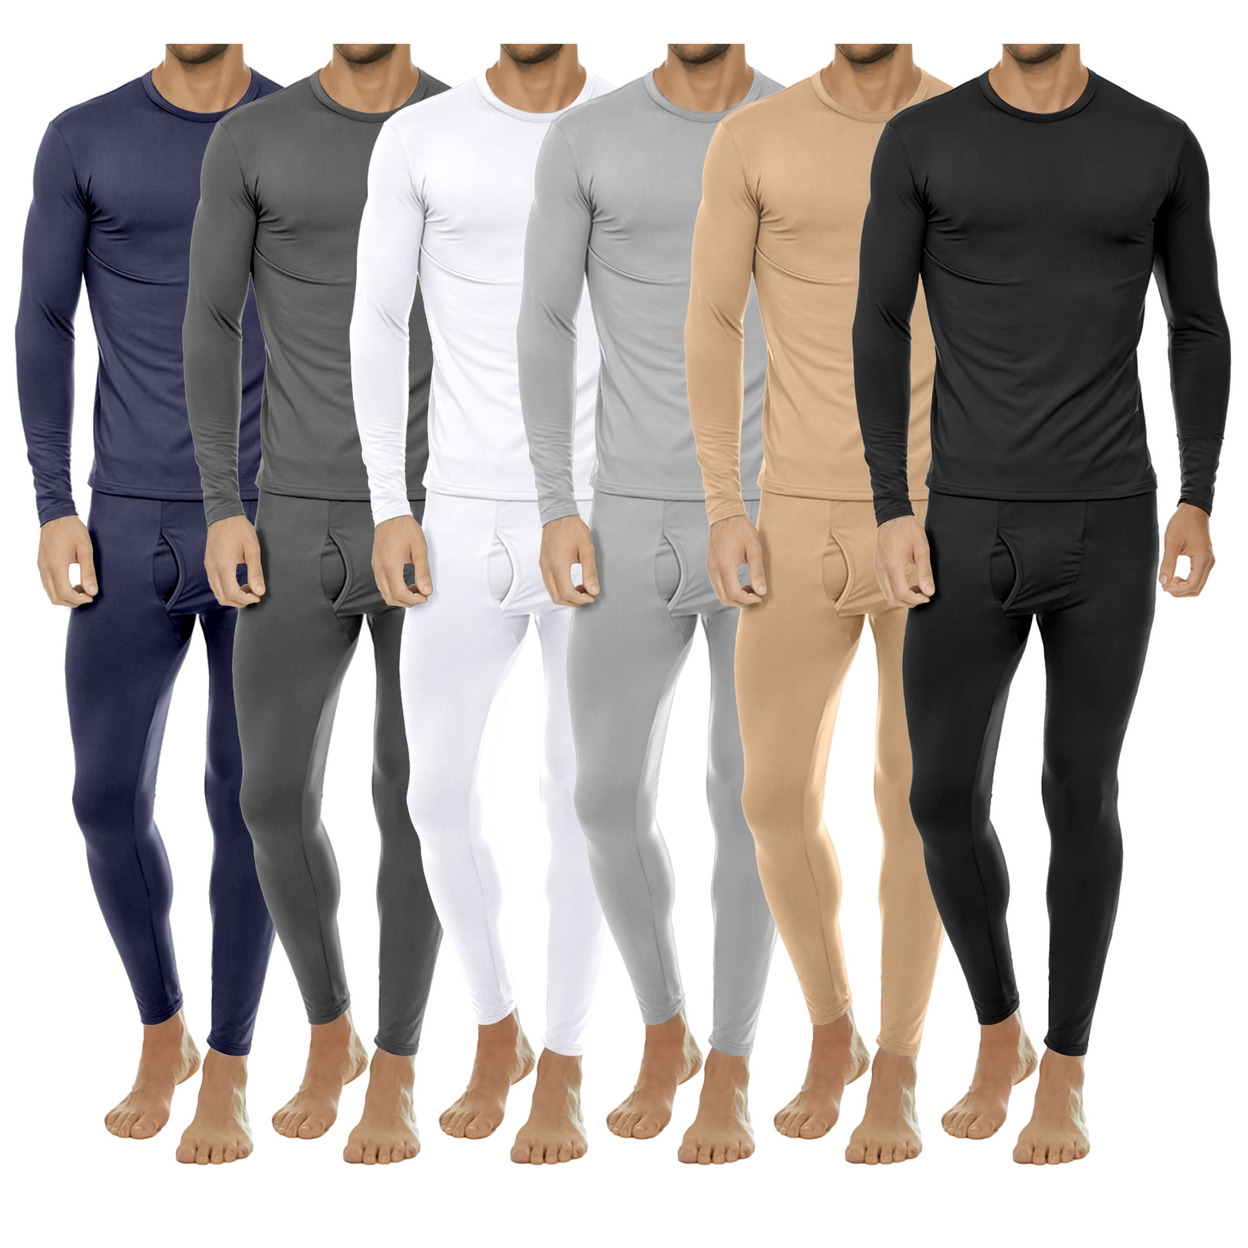 2-Pieces: Men's Winter Warm Fleece Lined Thermal Underwear Set For Cold Weather - White, Small